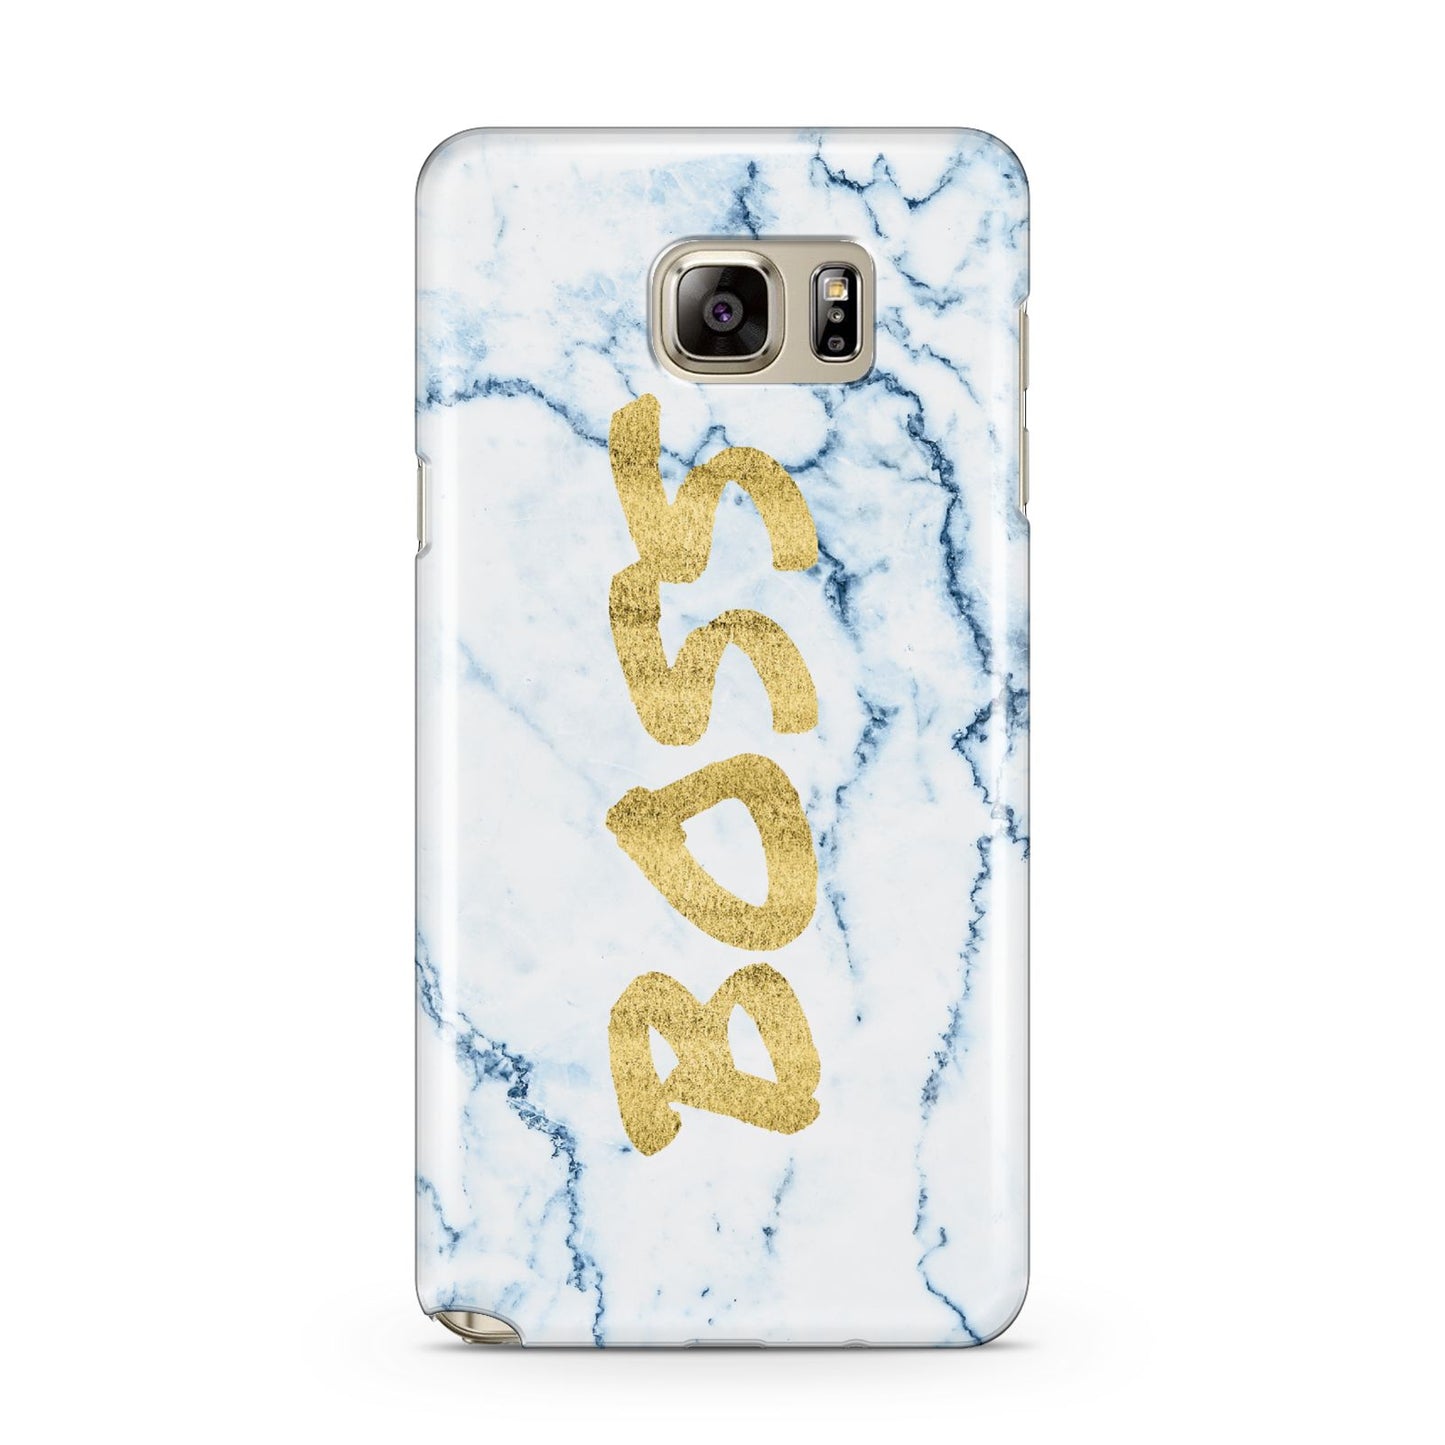 Boss Gold Blue Marble Effect Samsung Galaxy Note 5 Case